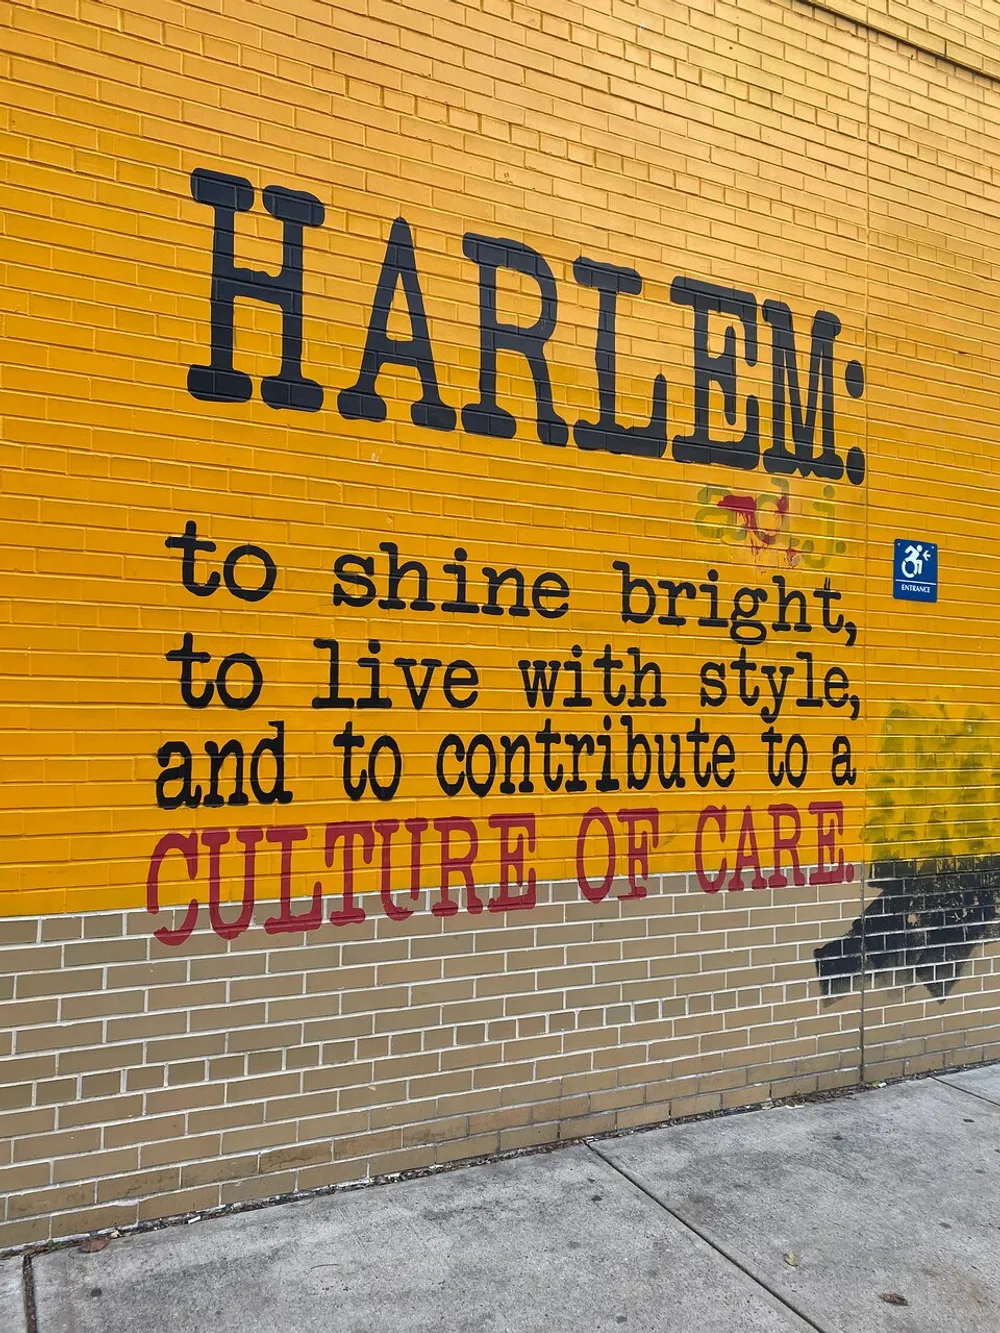 The image shows a yellow brick wall with large black letters spelling HARLEM along with a motivational message in smaller black and red letters below endorsing a culture of care